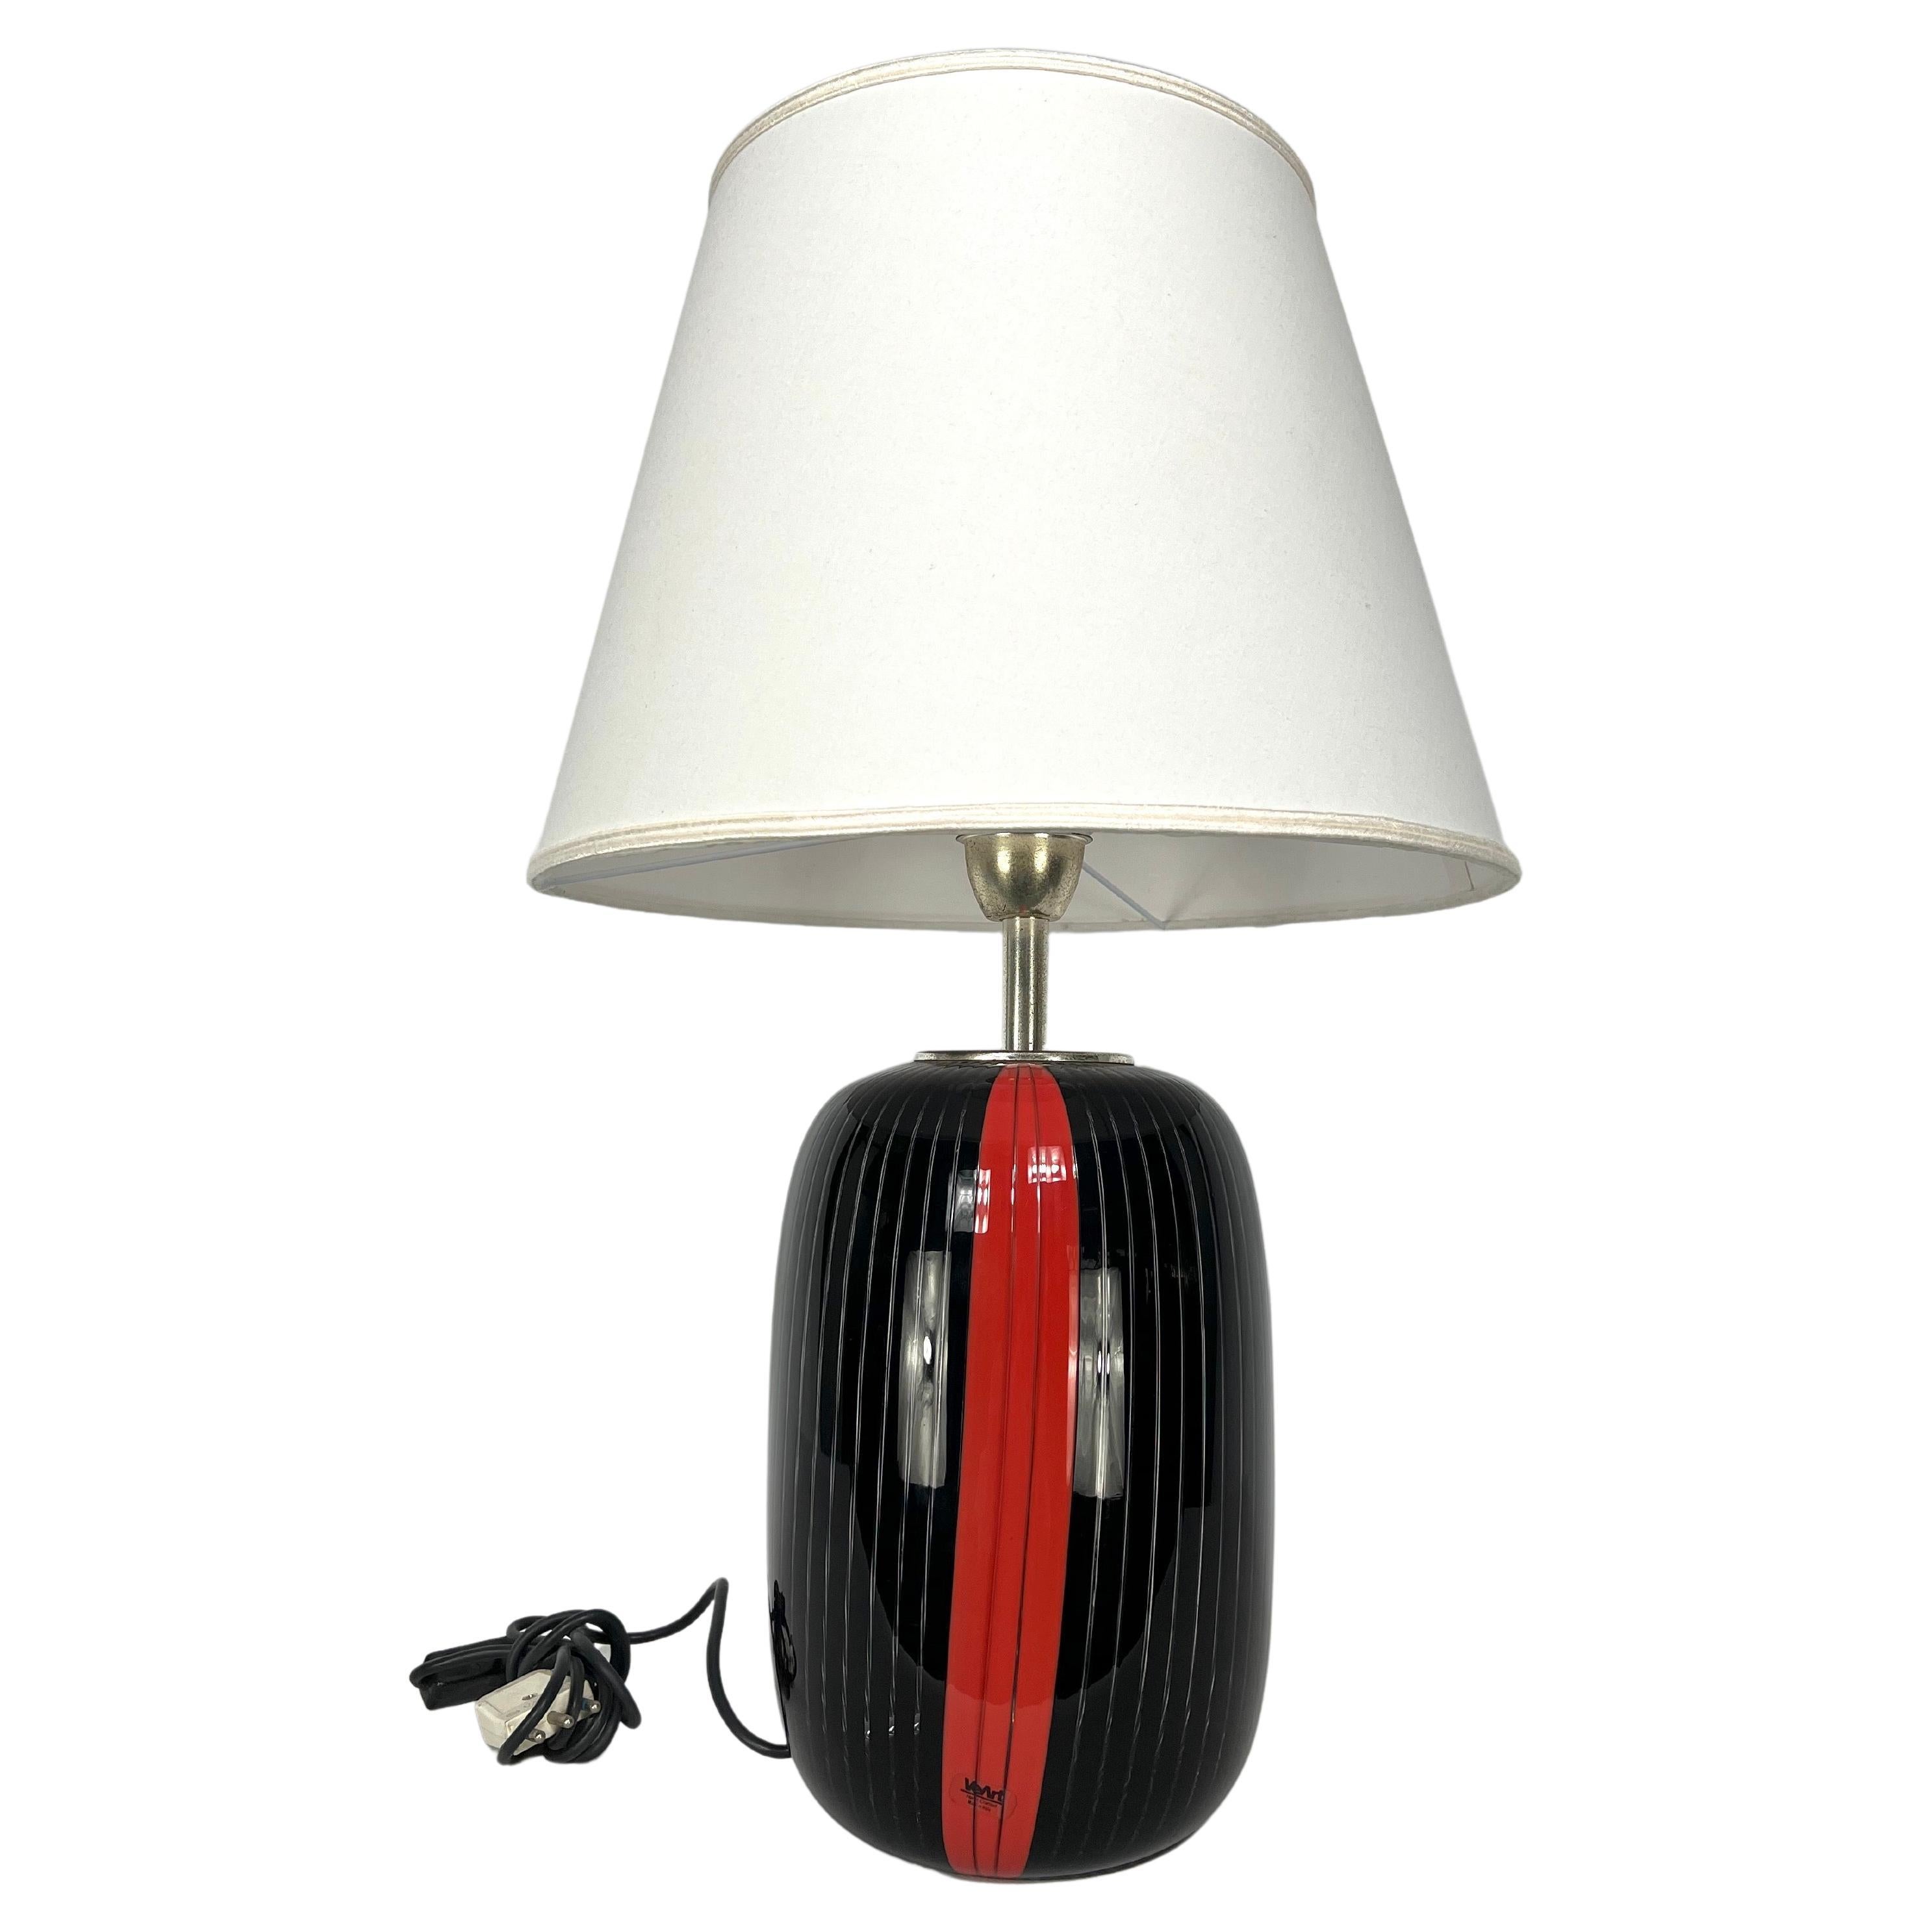 VeArt, black and red Murano glass table lamp from 70s. Labeled For Sale